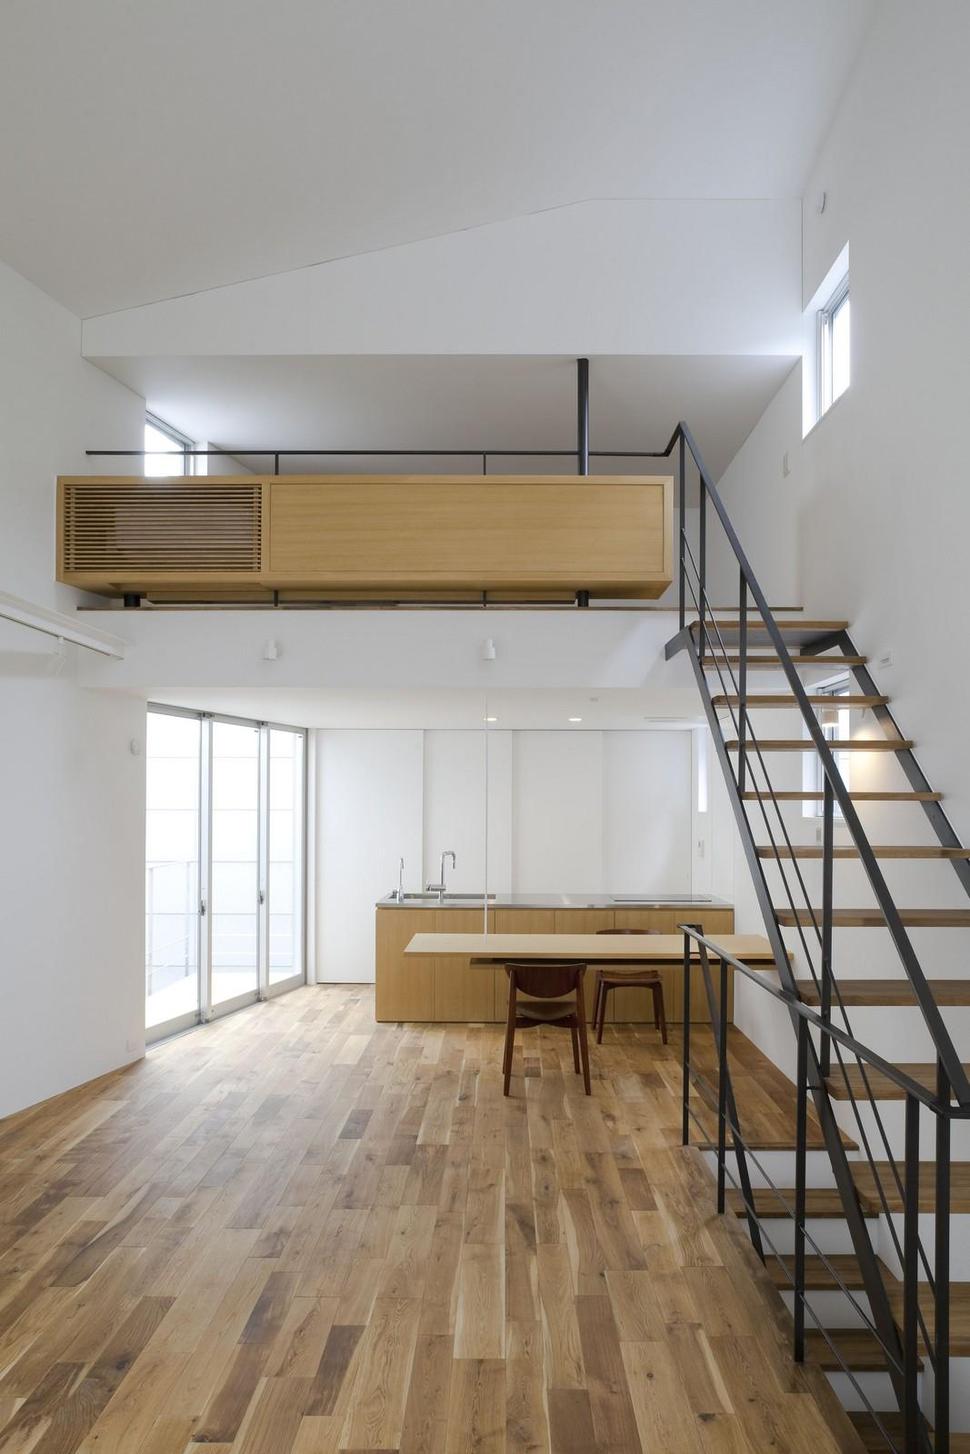 japanese-oh-house-wows-with-narrow-footprint-open-interiors-8.jpg